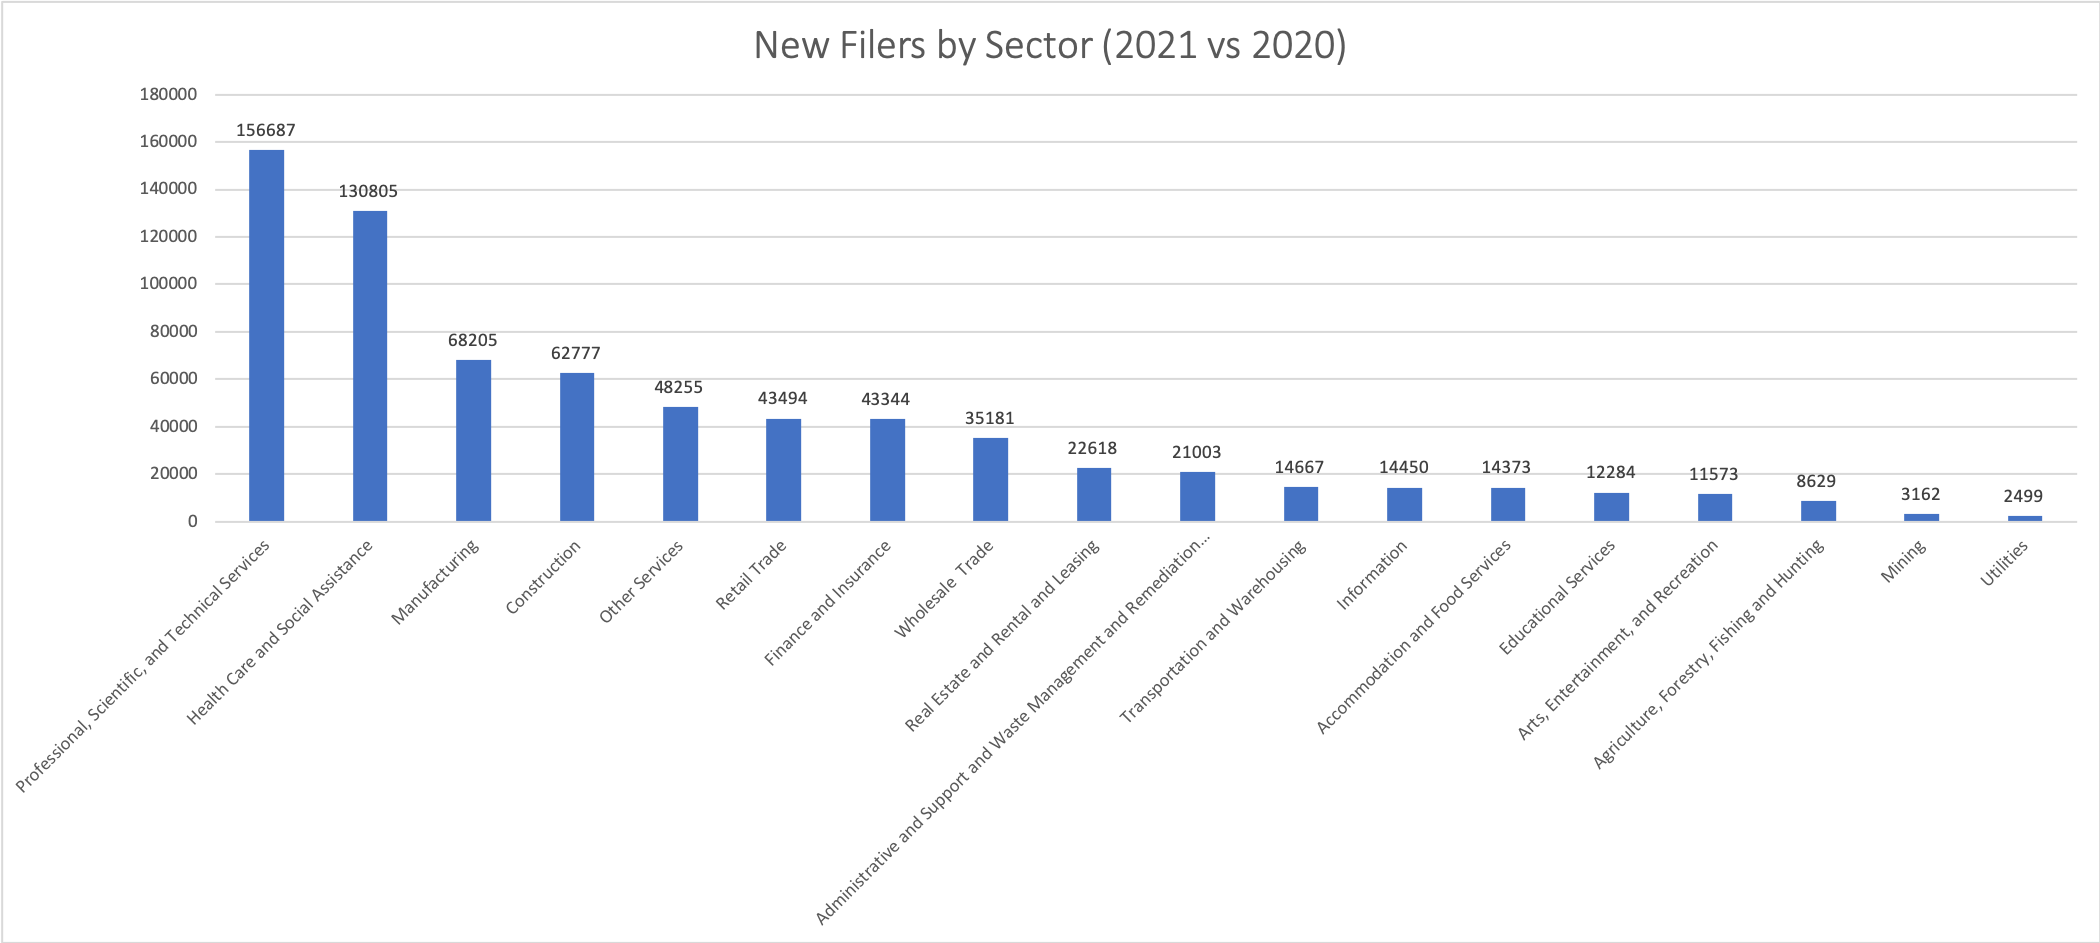 04 number of new filers per sector 2021